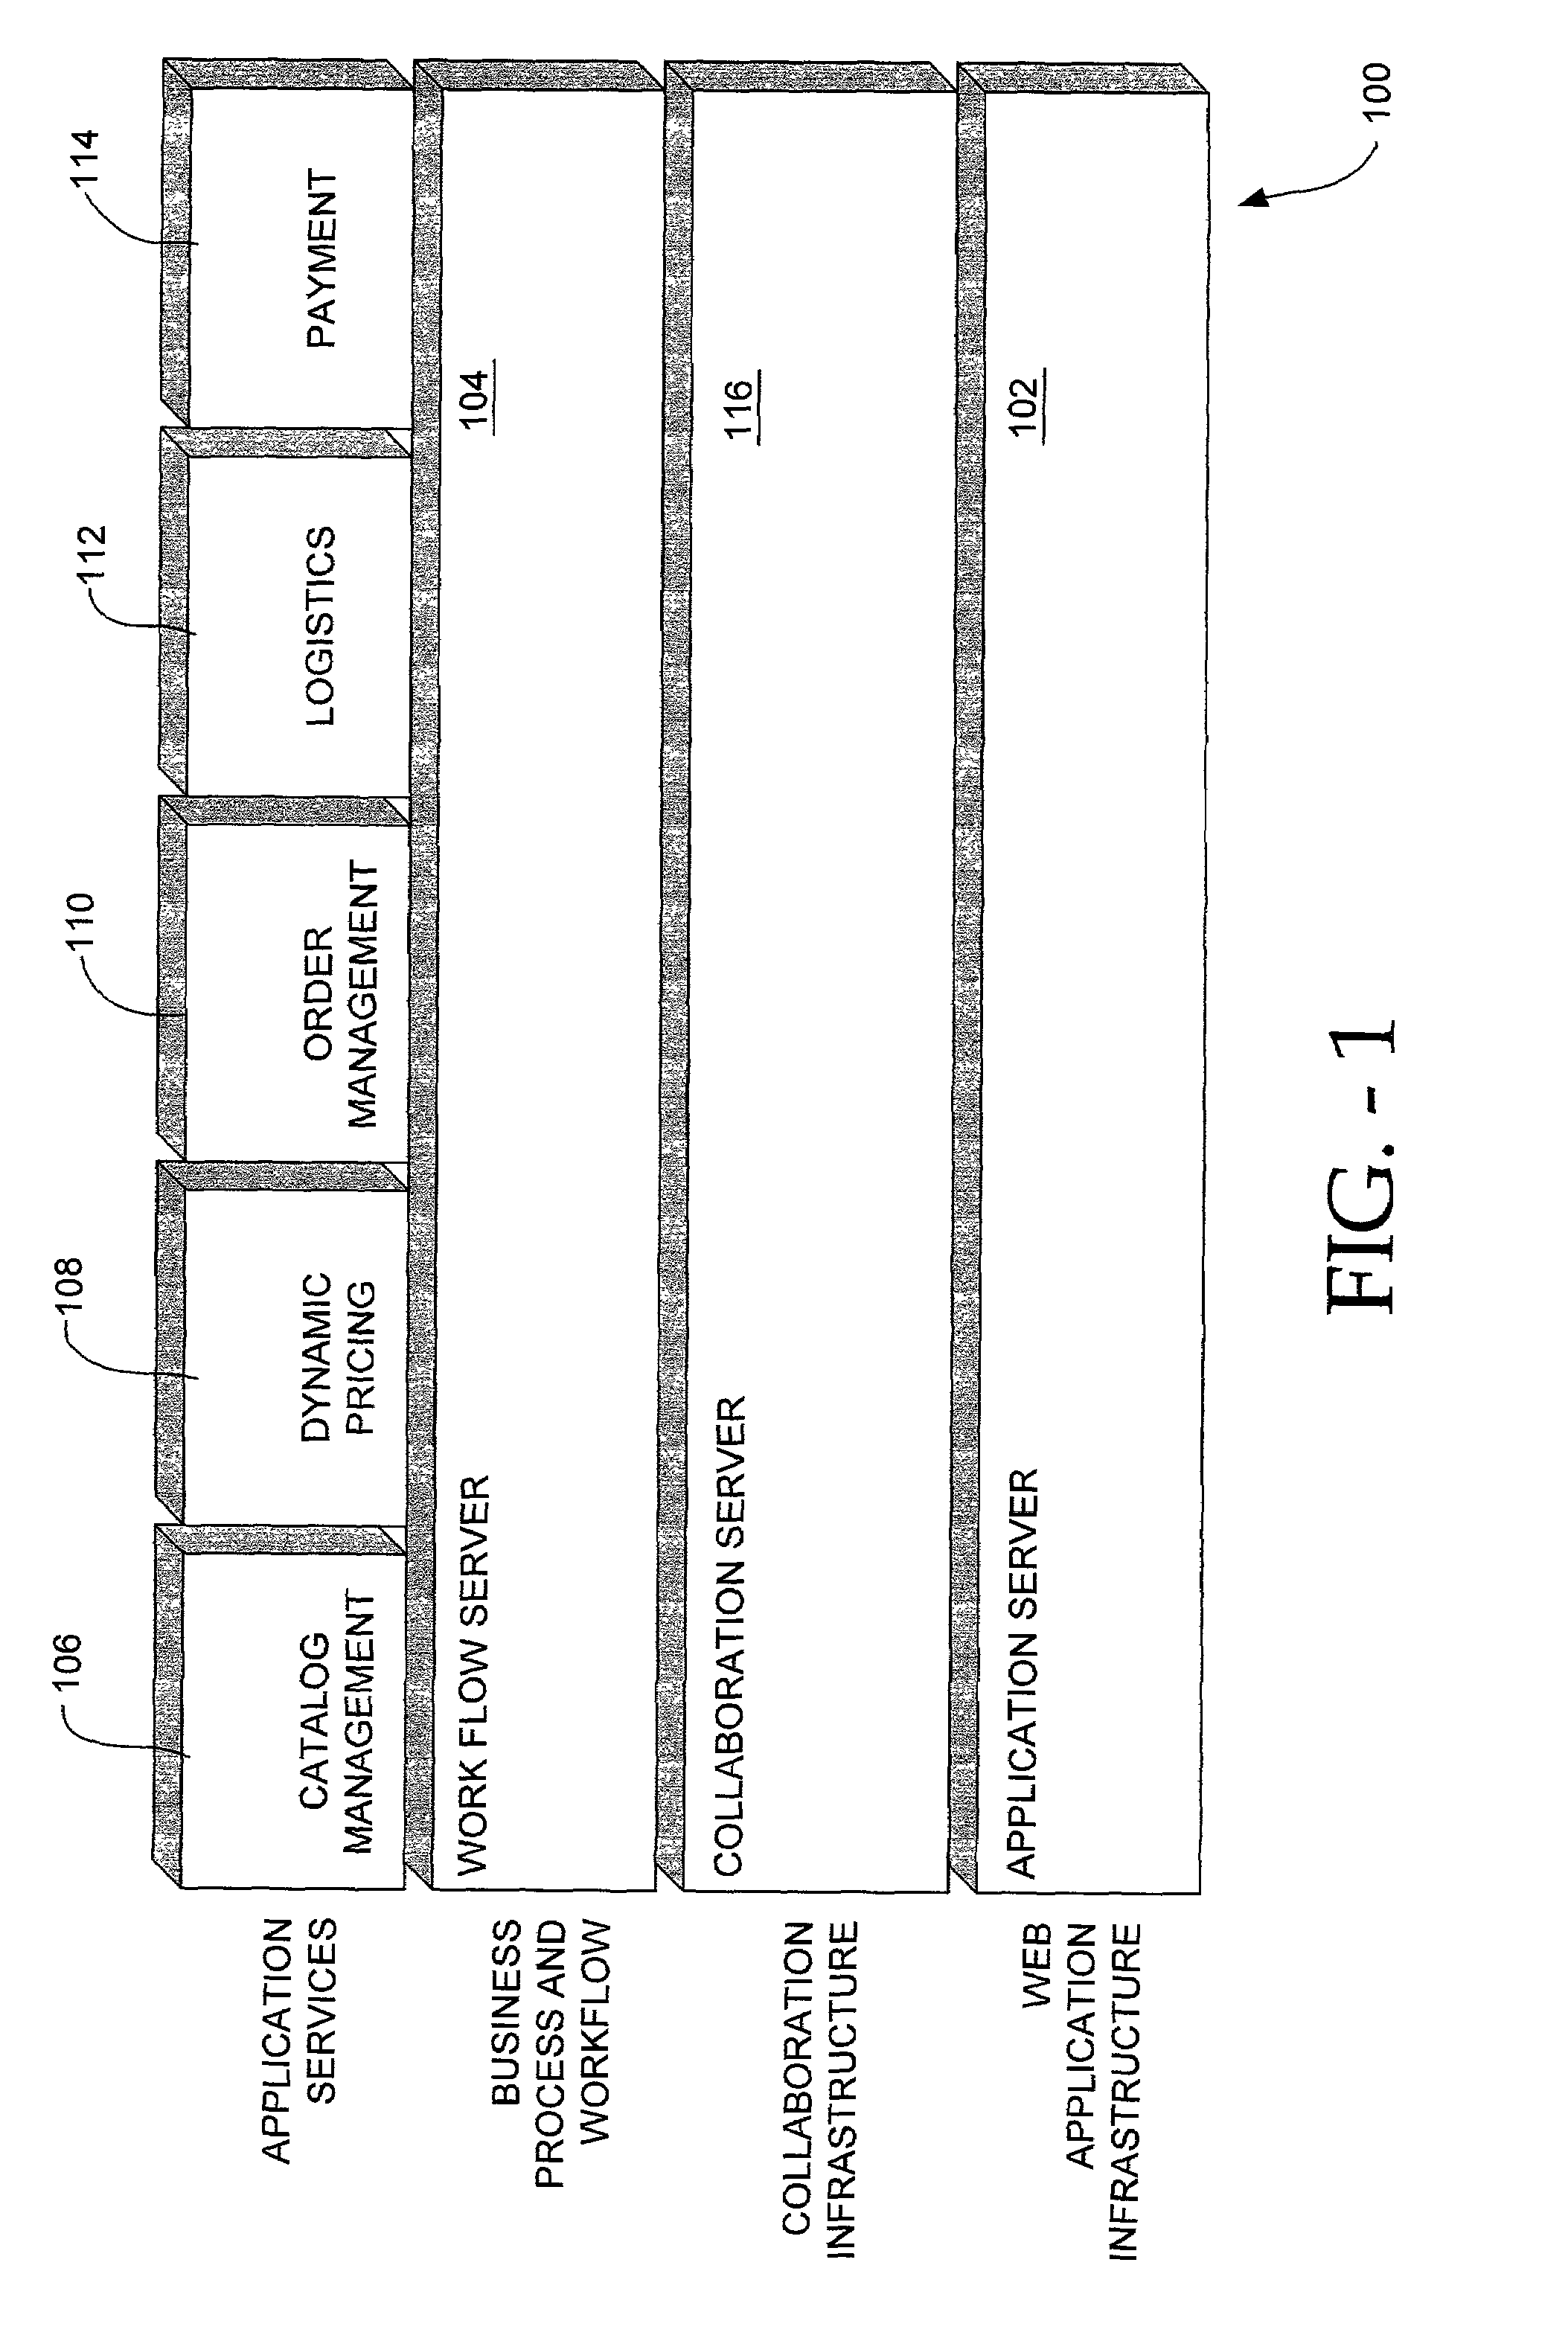 Collaboration system for exchanging of data between electronic participants via collaboration space by using a URL to identify a combination of both collaboration space and business protocol